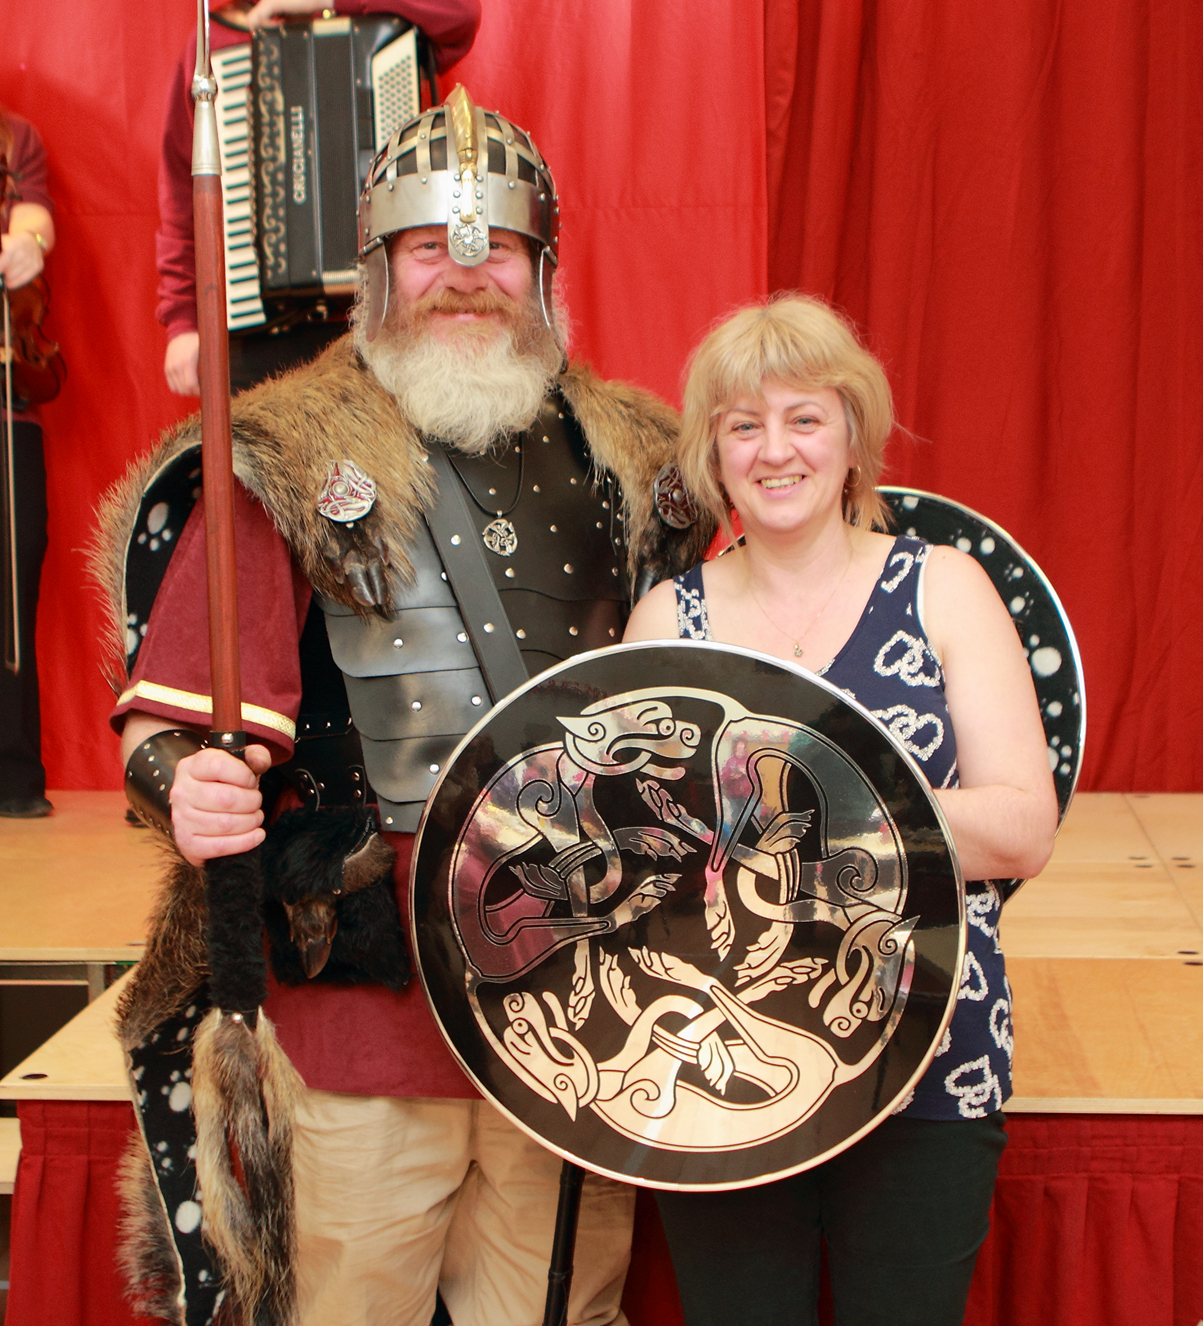 Wir Jarl presenting the shield to Alexis a Committee Member for the Hall